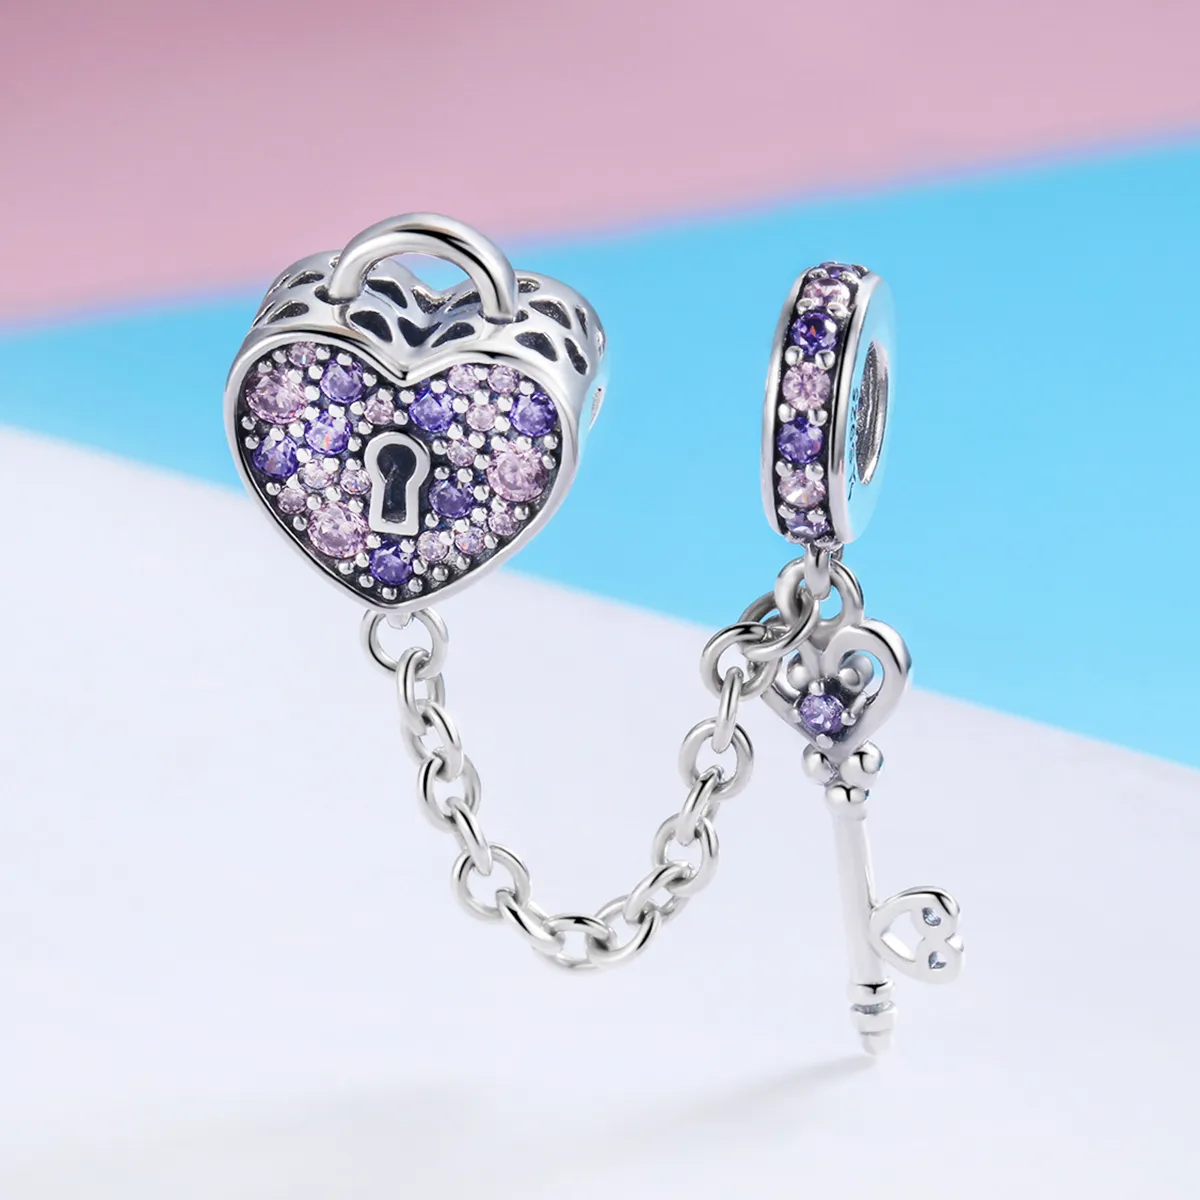 Pandora Style Silver Heart Spoon Safety Chain - SCC772